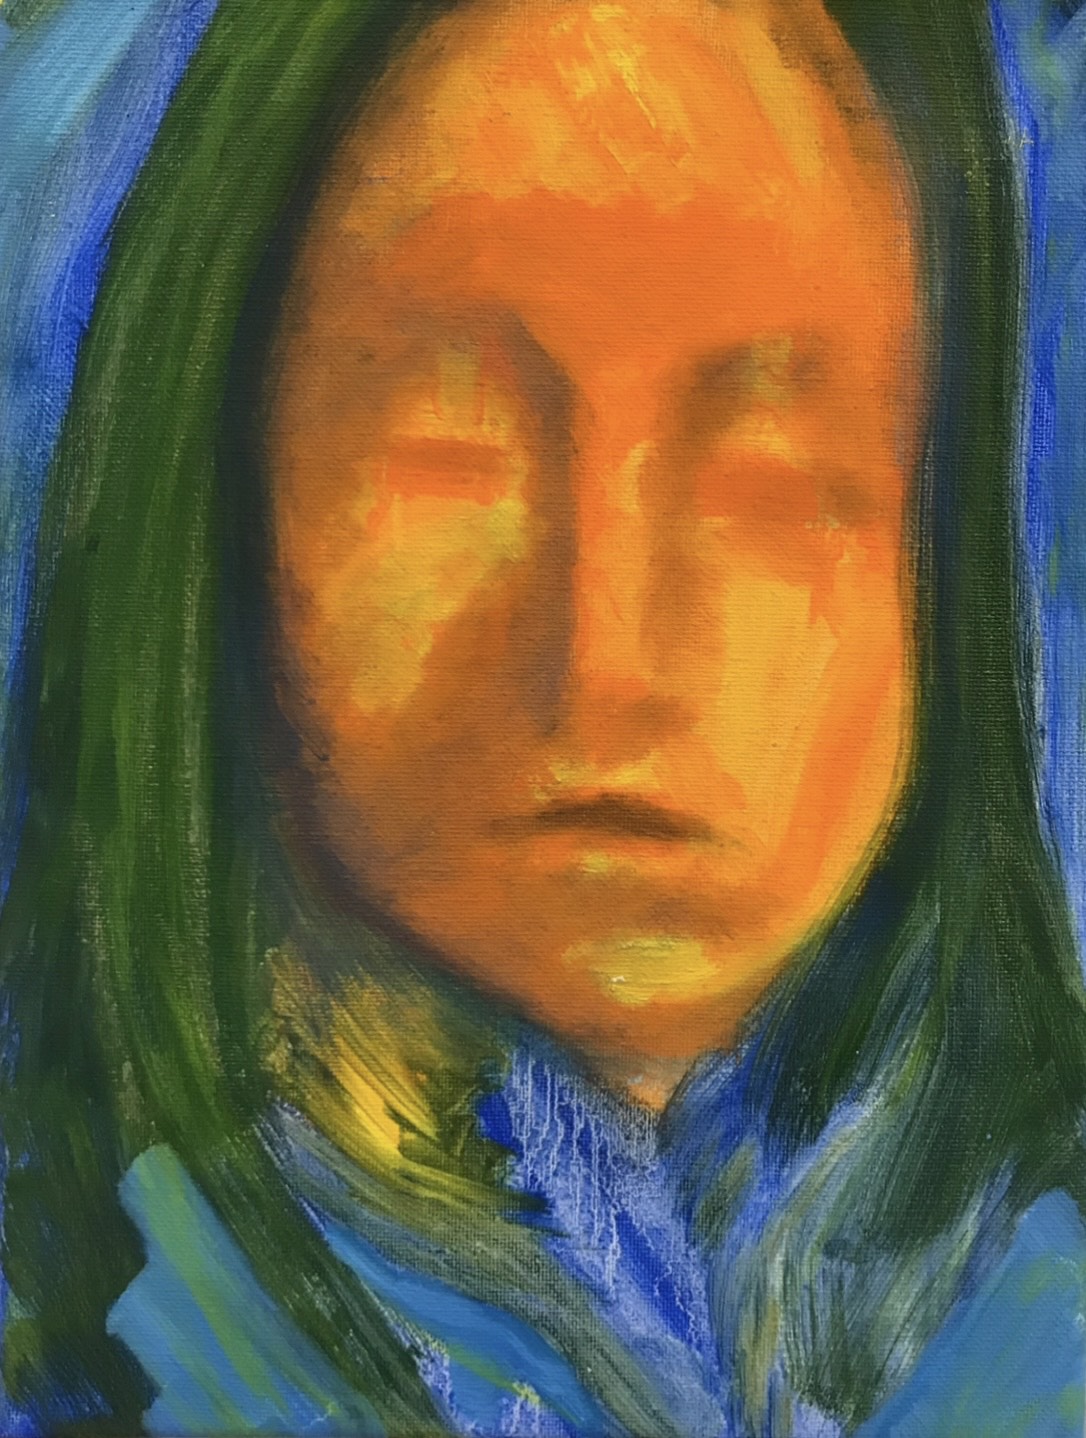 Abstracted bust portrait of a figure with orange skin and green hair